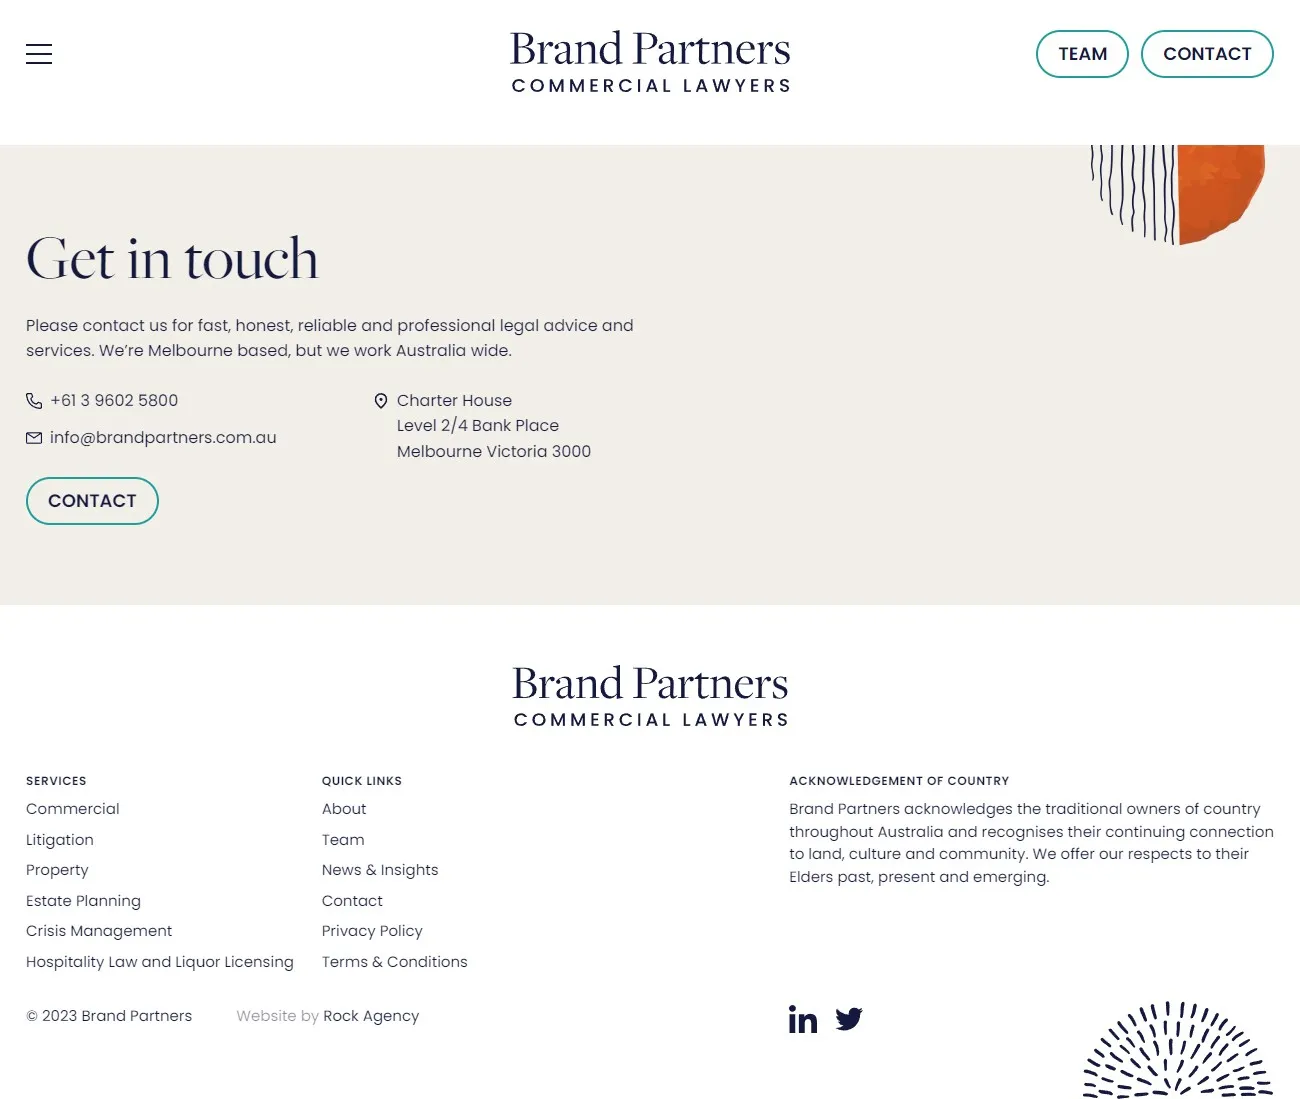 Brand Partners Commercial Lawyers